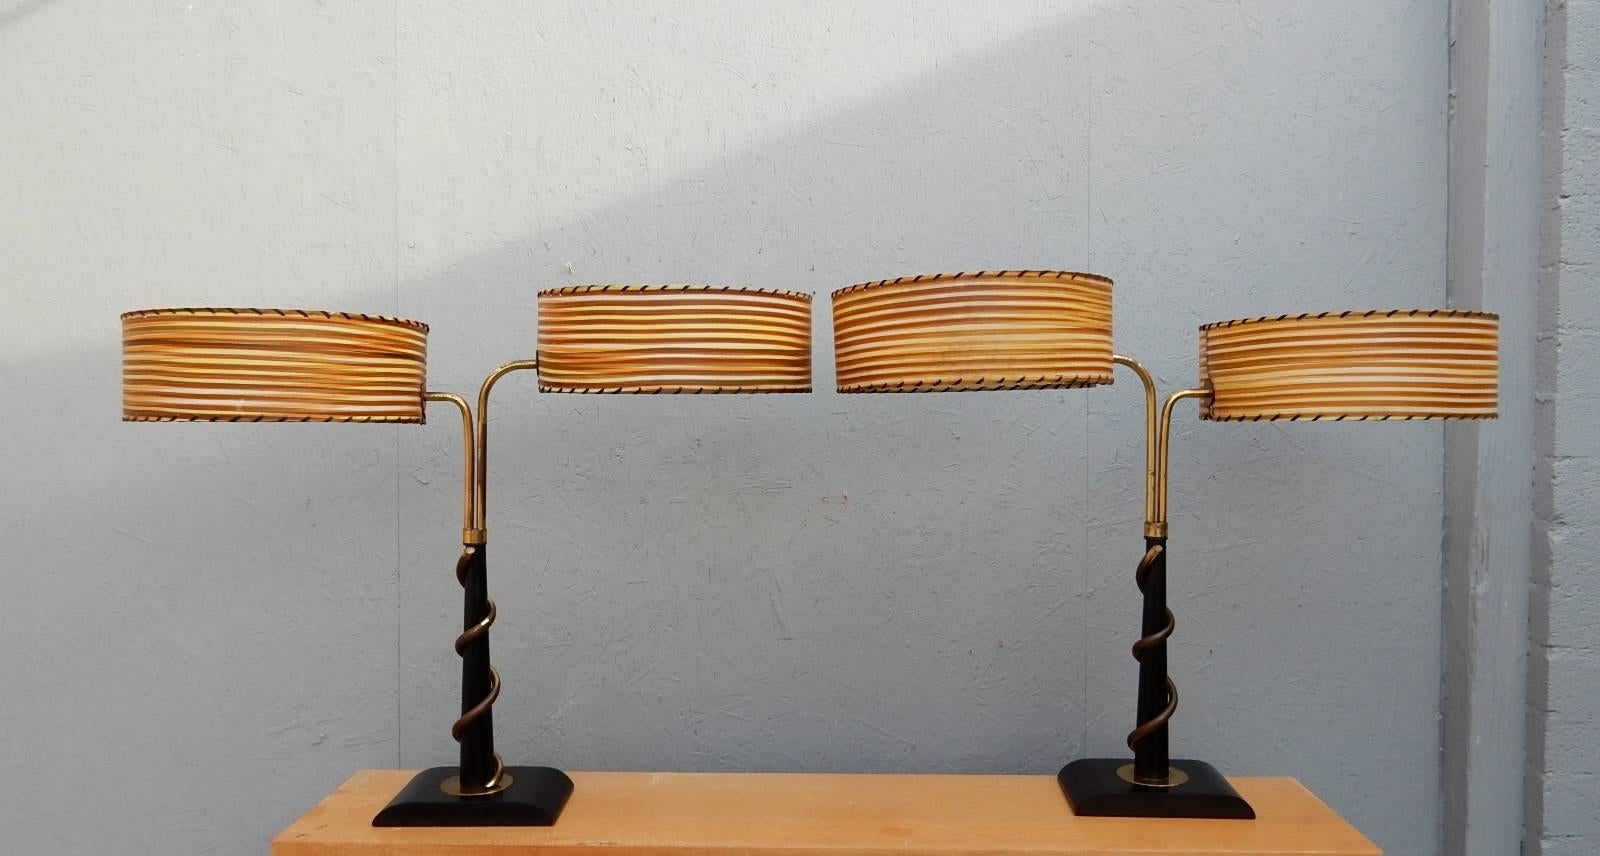 Rare, early pair of lamps from the Majestic Lamp Co.
Brass-plated copper swirl over ebonized oak. Each has two original striped shades. Some fading on shades and tarnish on plating that one would expect from age.